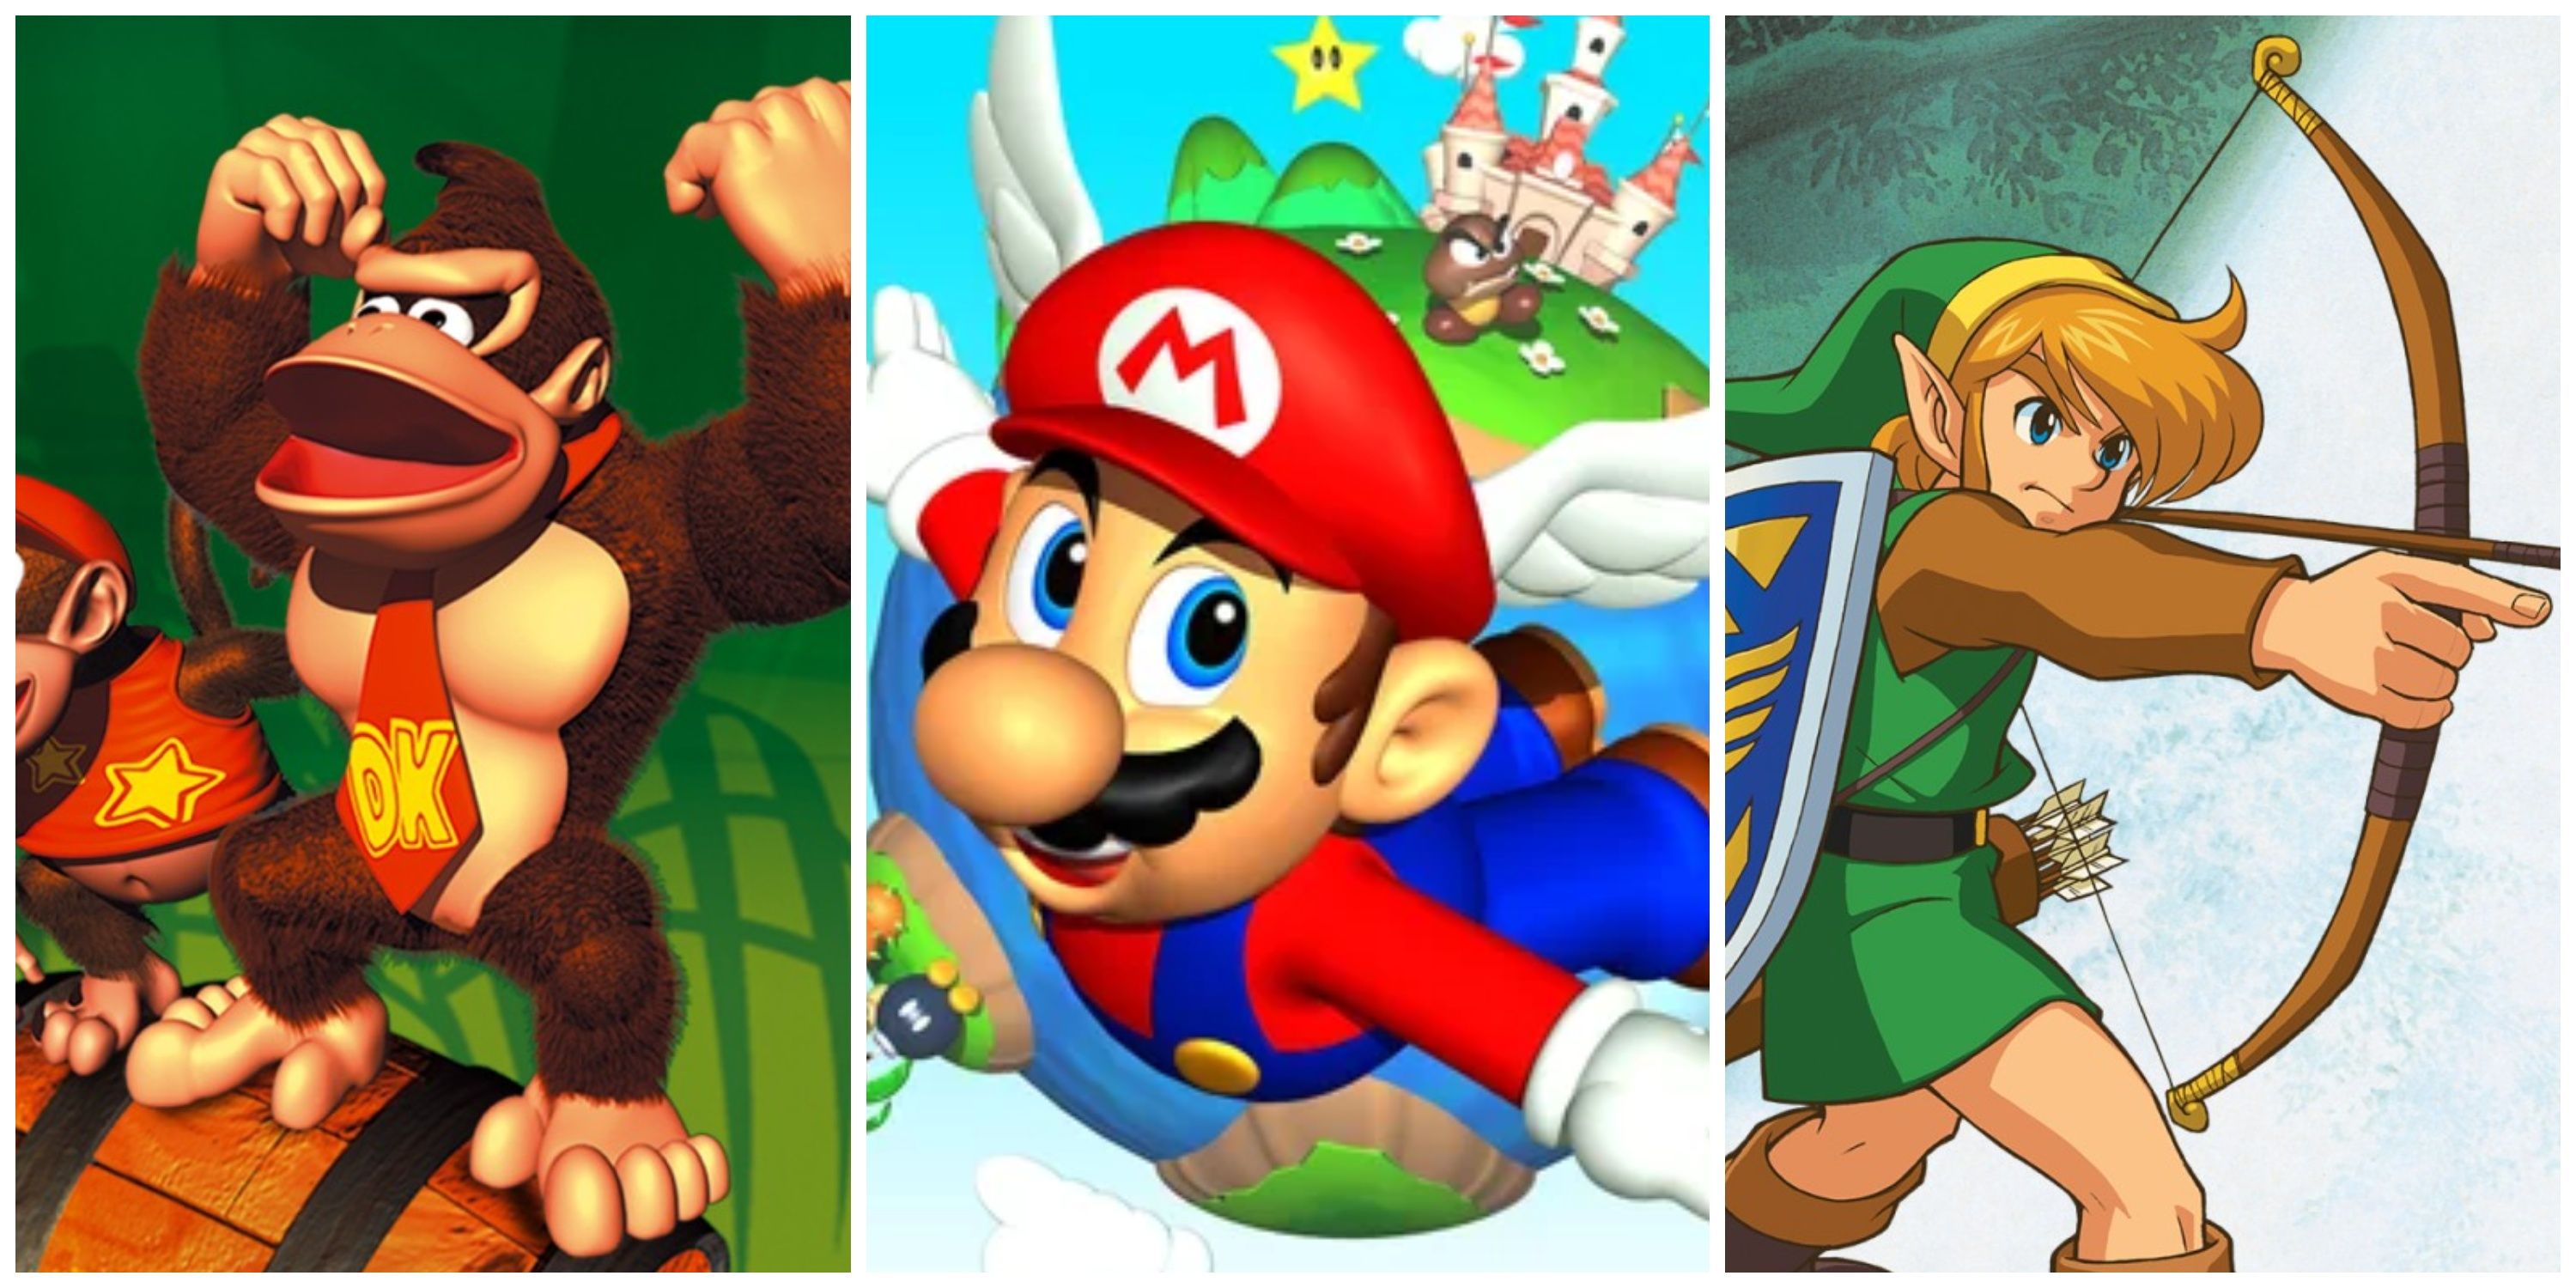 donkey kong, mario 64, a link to the past